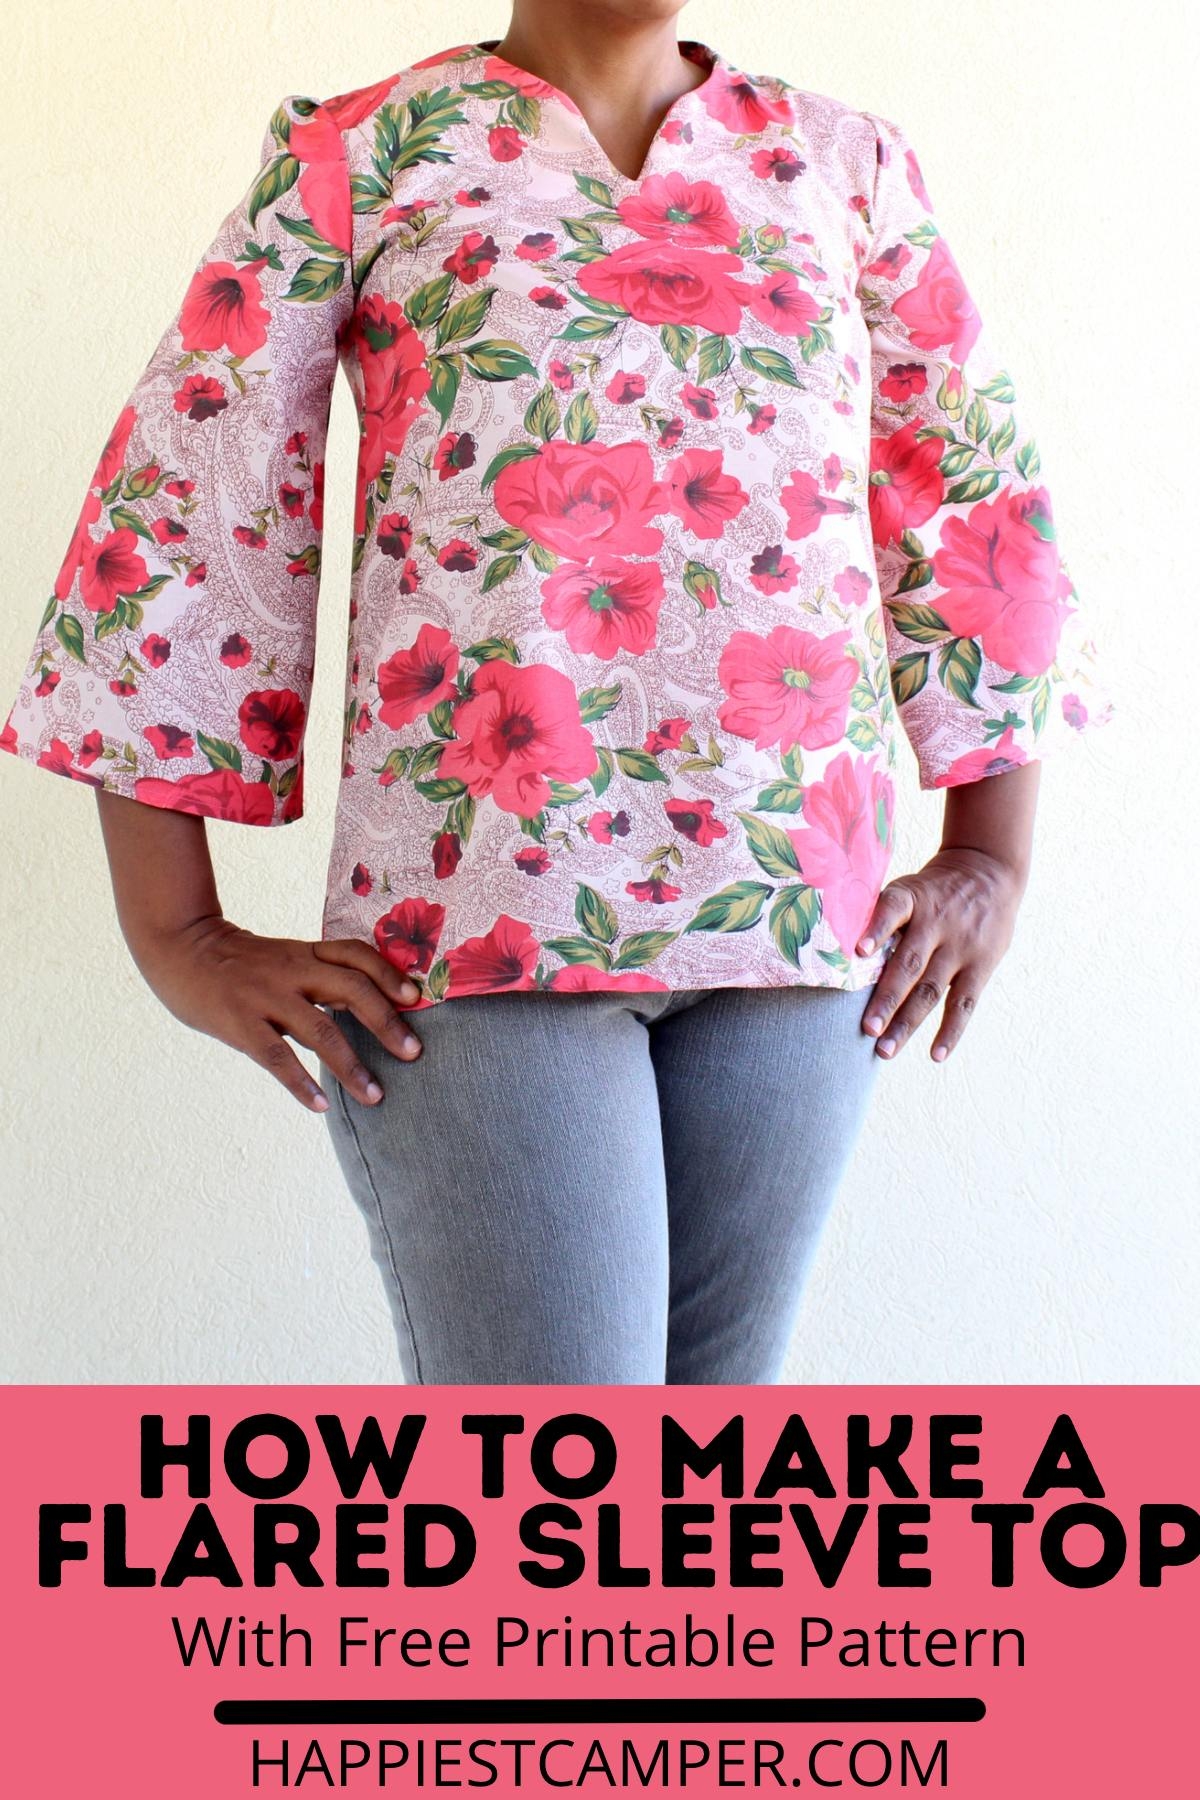 How To Make A Flared Sleeve Top With Free Printable Pattern